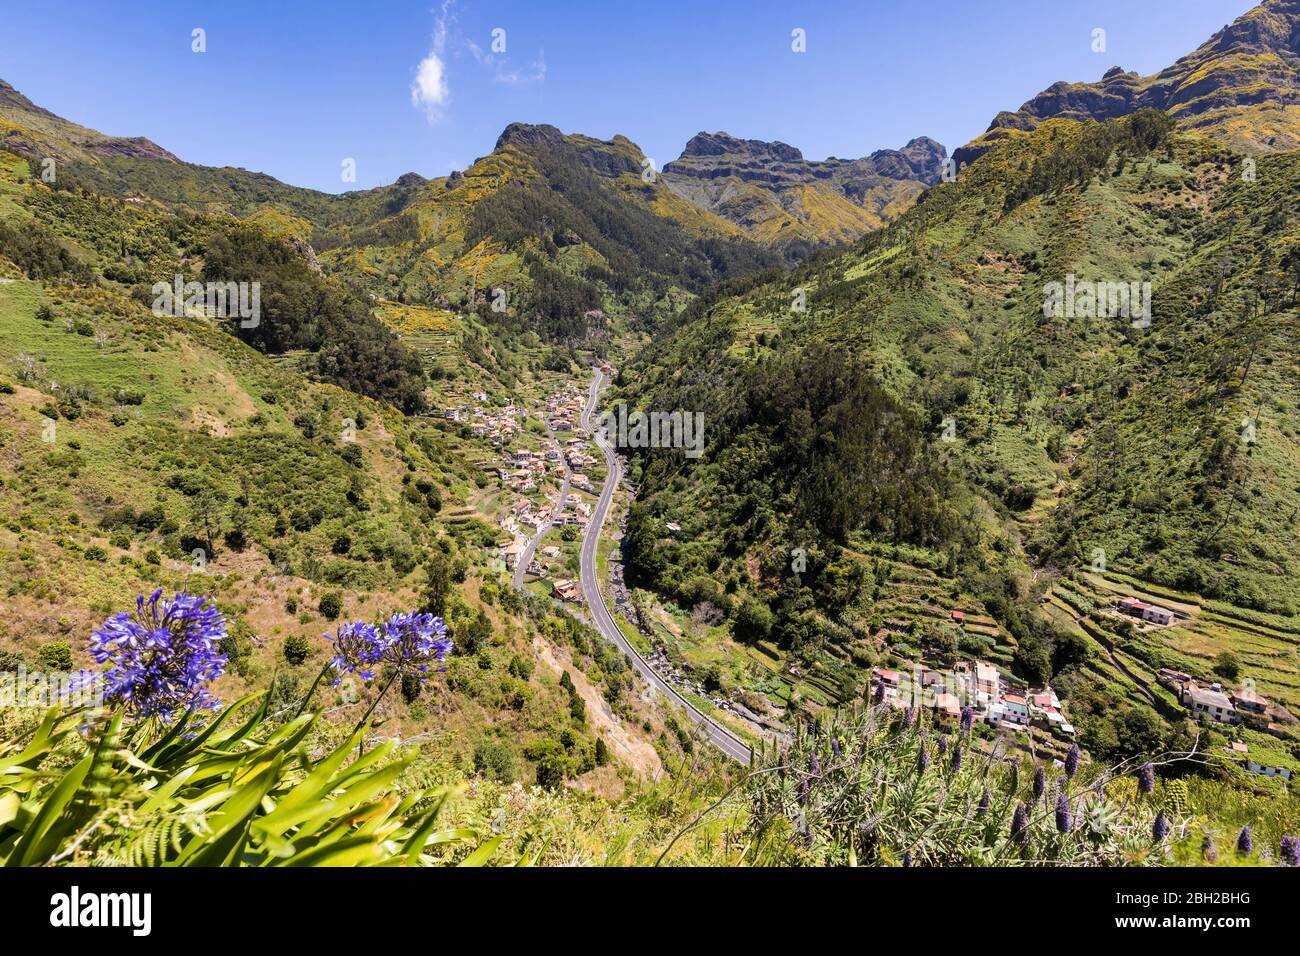 Portugal, Madeira, Serra de Agua, High angle view of village in green mountain valley Stock Photo